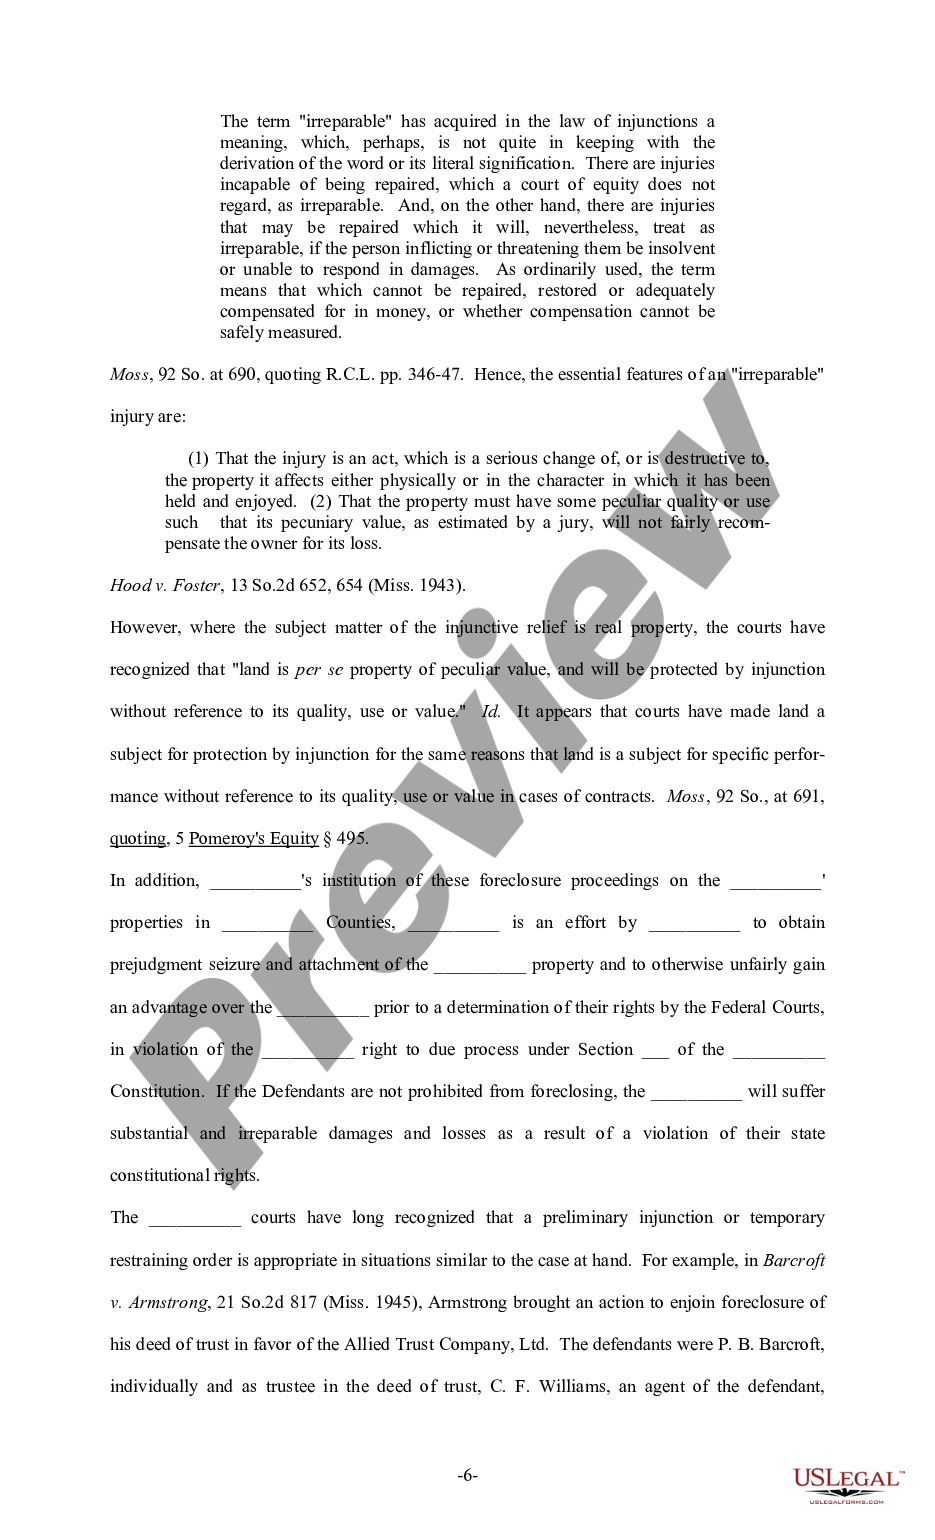 page 5 Sample Brief - Injunction preview